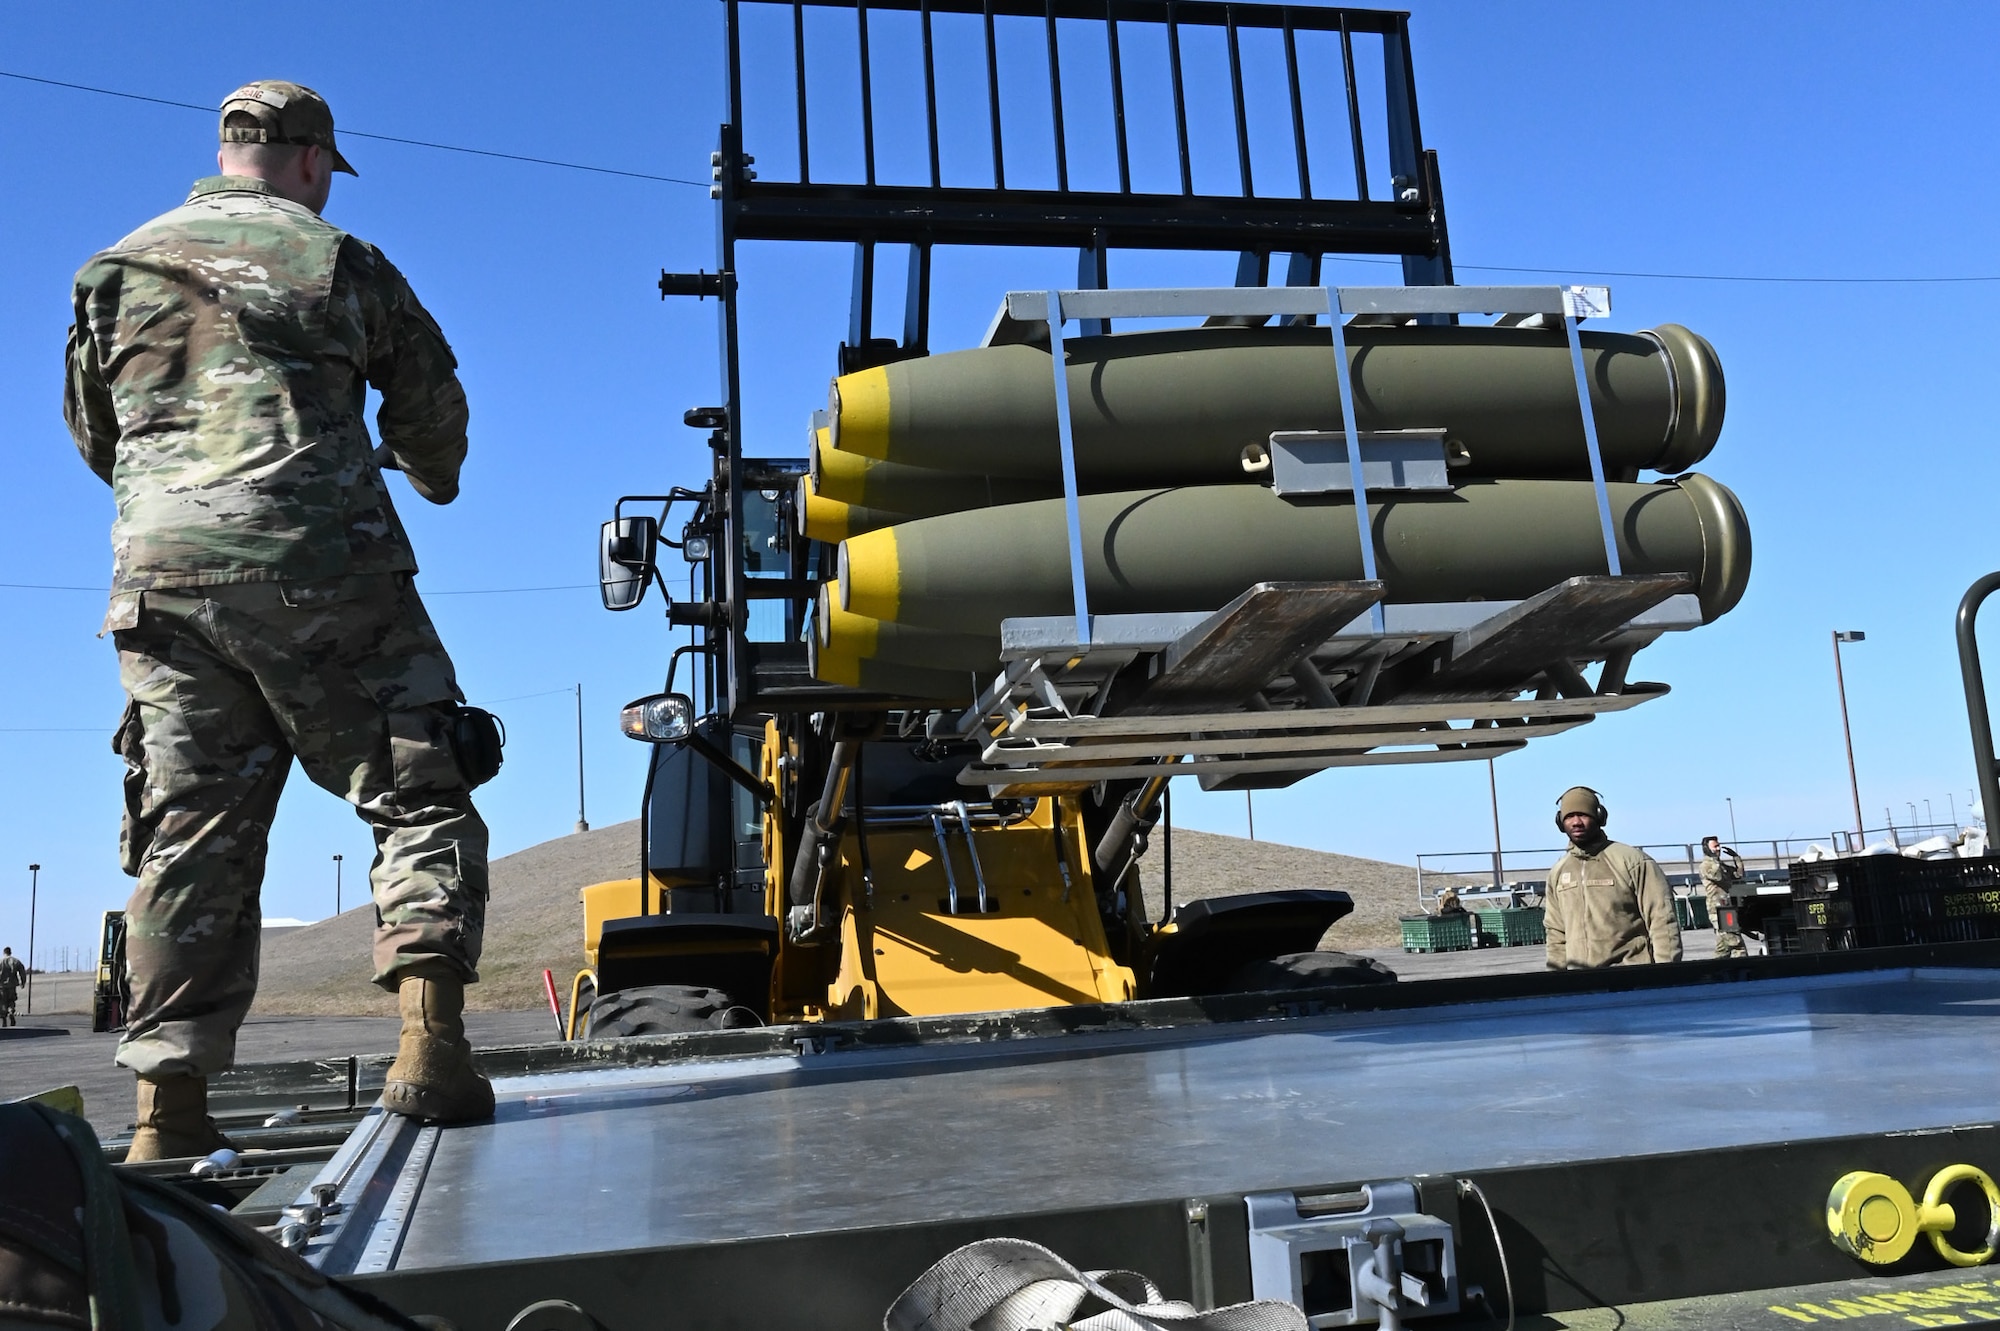 airman guiding fork lift with munitions toward truck